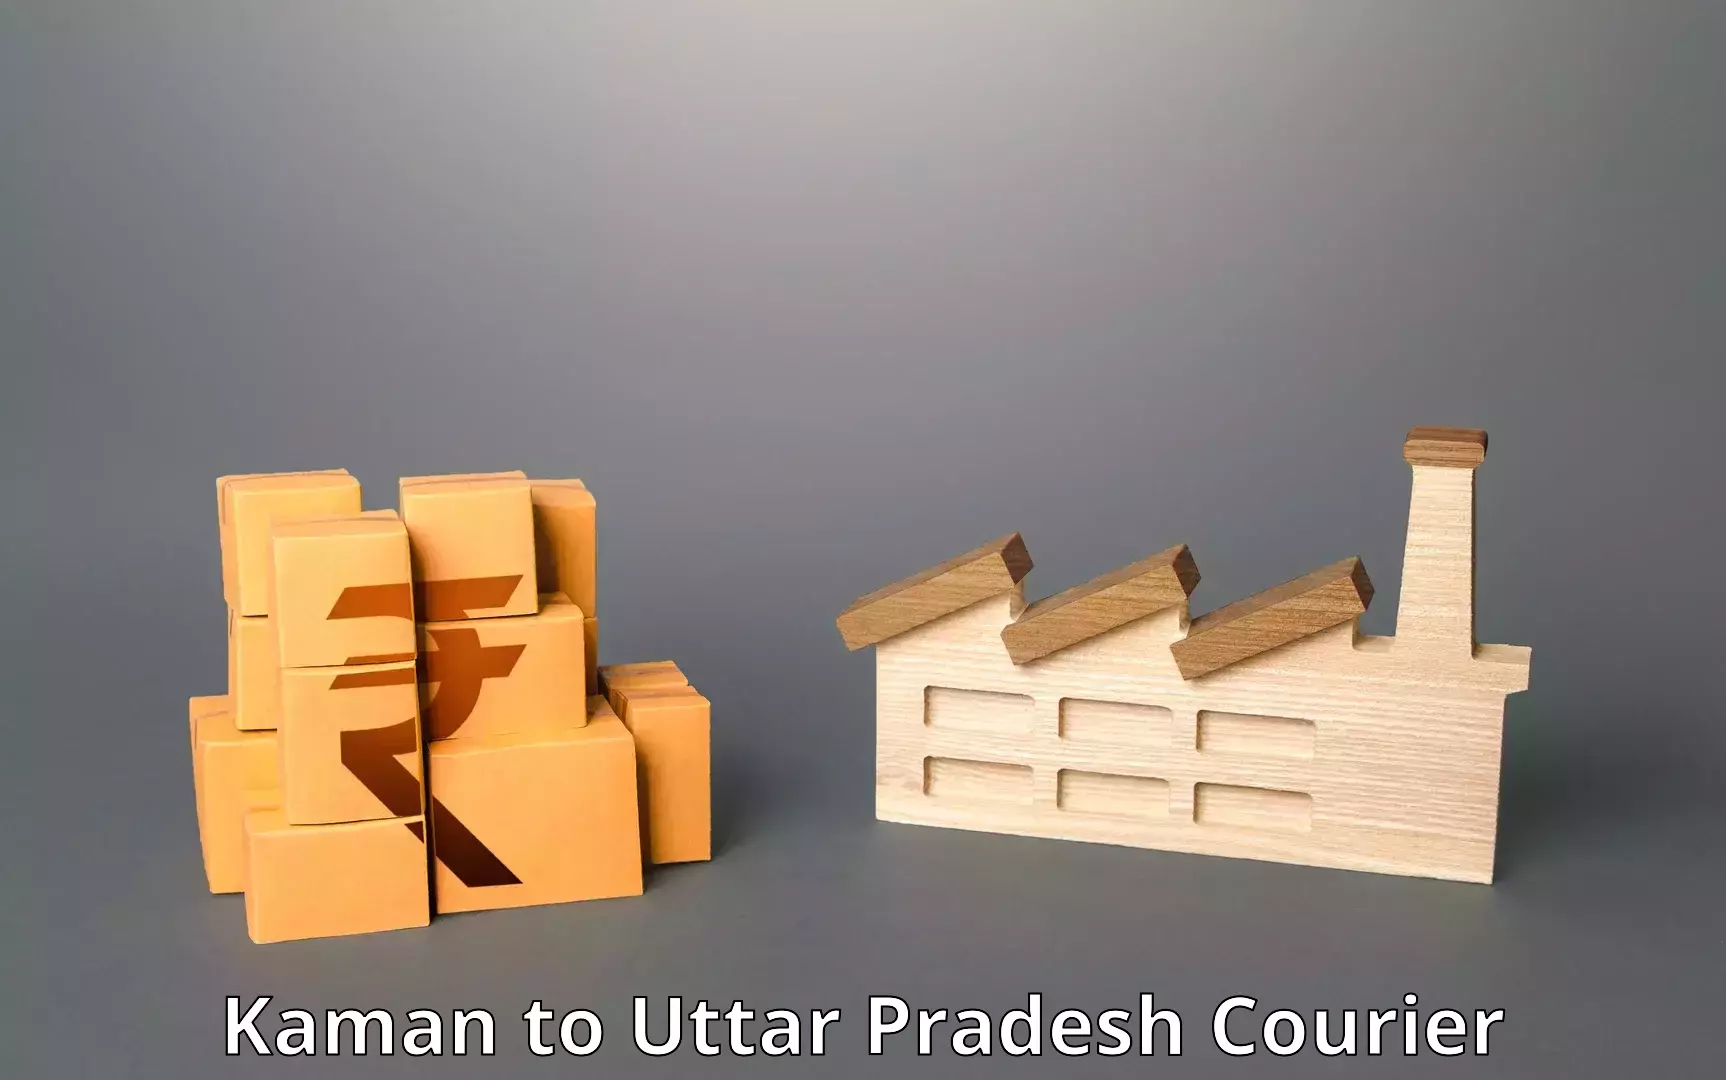 Efficient parcel tracking in Kaman to Unchahar